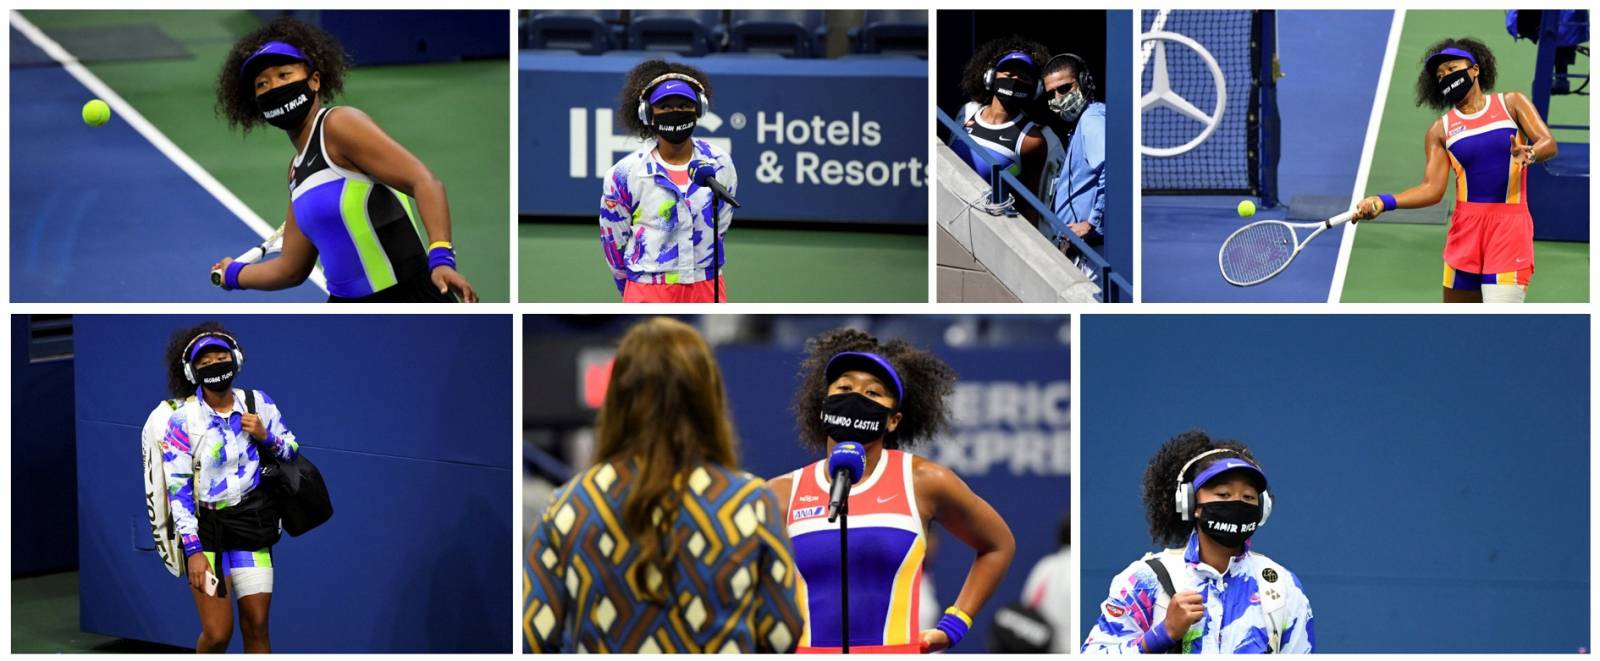 A combination picture shows tennis player Naomi Osaka of Japan wearing protective face masks to honor Breonna Taylor, Trayvon Martin, George Floyd, Philando Castile, Elijah McClain, Ahmaud Arbery and Tamir Rice during the 2020 U.S. Open tennis tournament